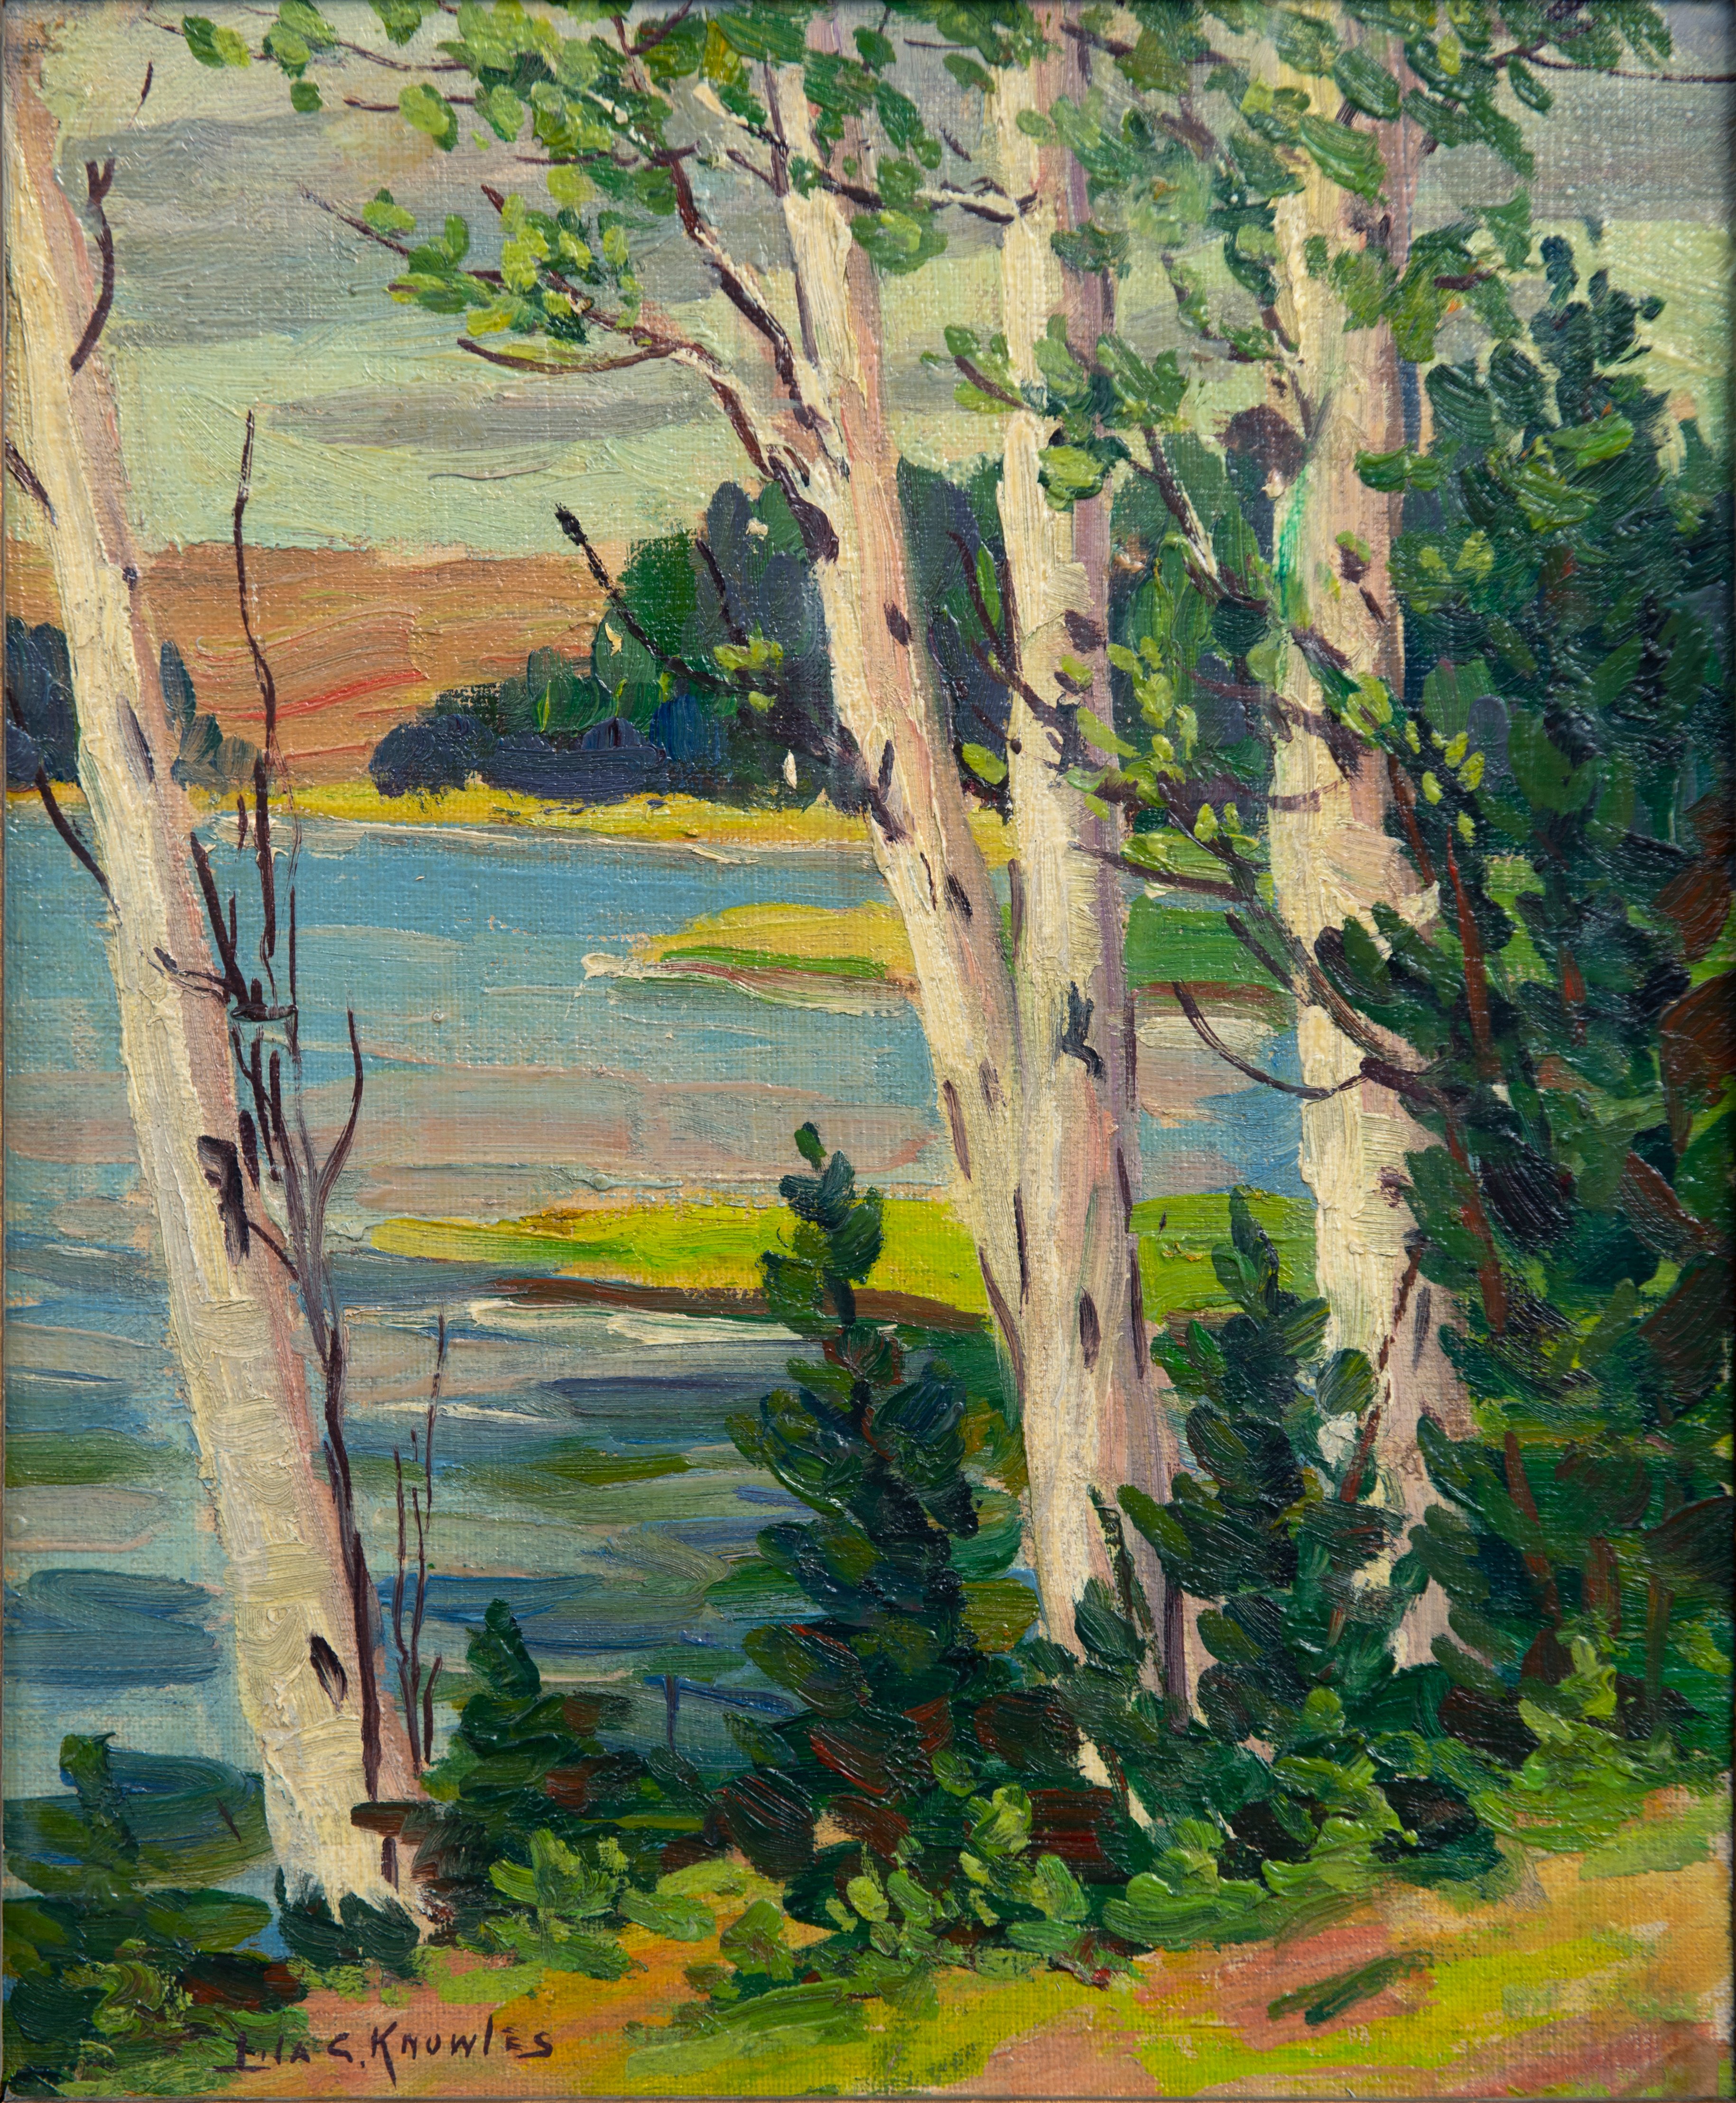 Hiawatha Trail (Entrance) going to Athletic Park (Free standing)
Artist: Lila Caroline Mc Gillivray Knowles, Birches, c.1950, Oil on canvas
ST. THOMAS-ELGIN PUBLIC ART CENTRE-PERMANENT COLLECTION
“THE ESTATE OF DONNA VERA EVANS BUSHELL AND THE ELGIN-ST. THOMAS COMMUNITY FOUNDATION”